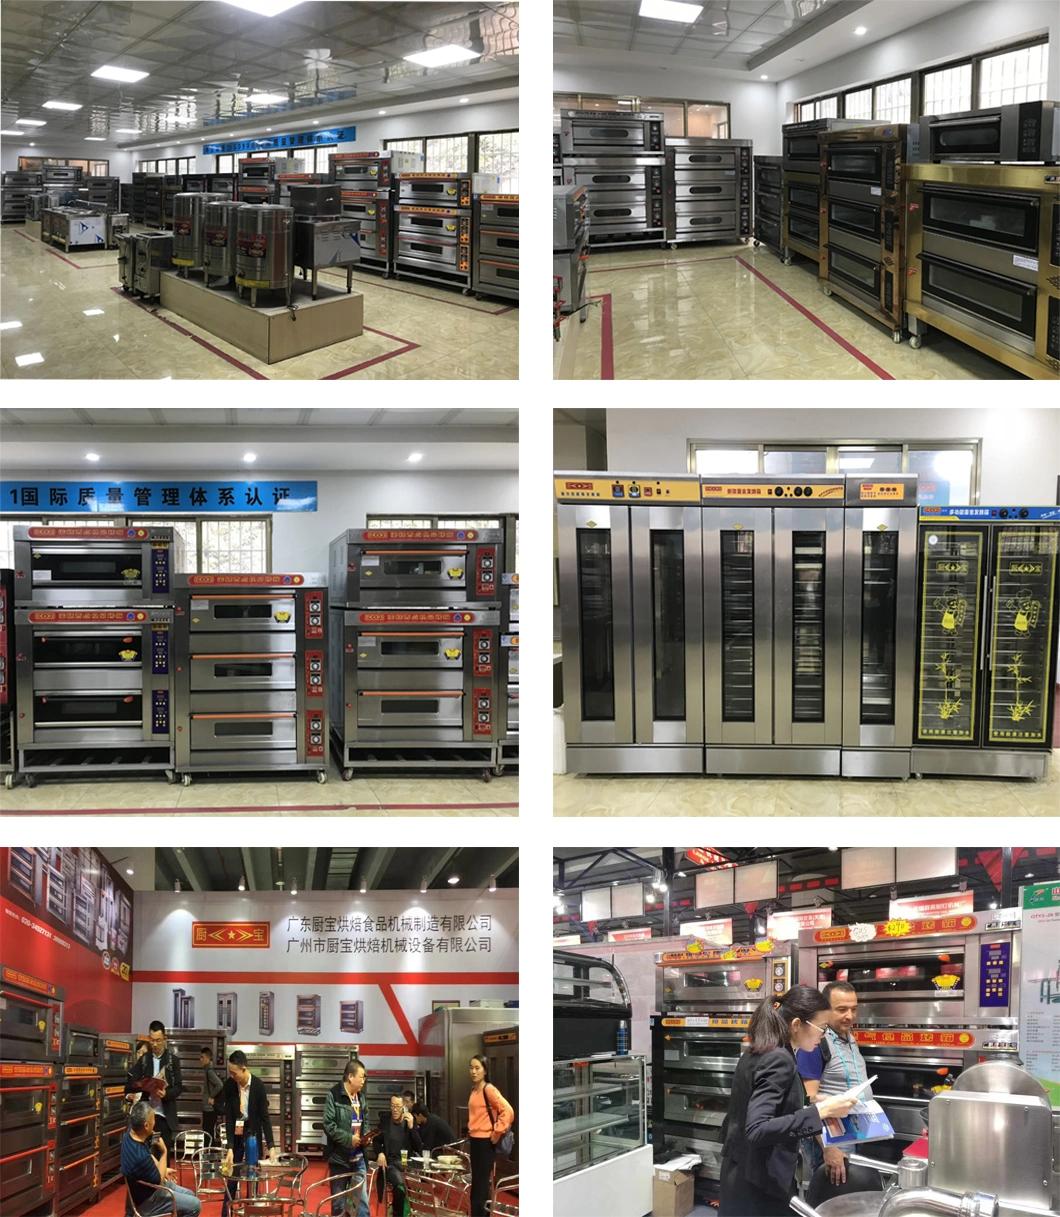 3 Deck 9 Trays Electirc Oven for Commercial Restaurant Kitchen Baking Equipment Bakery Machine Bread Machinery